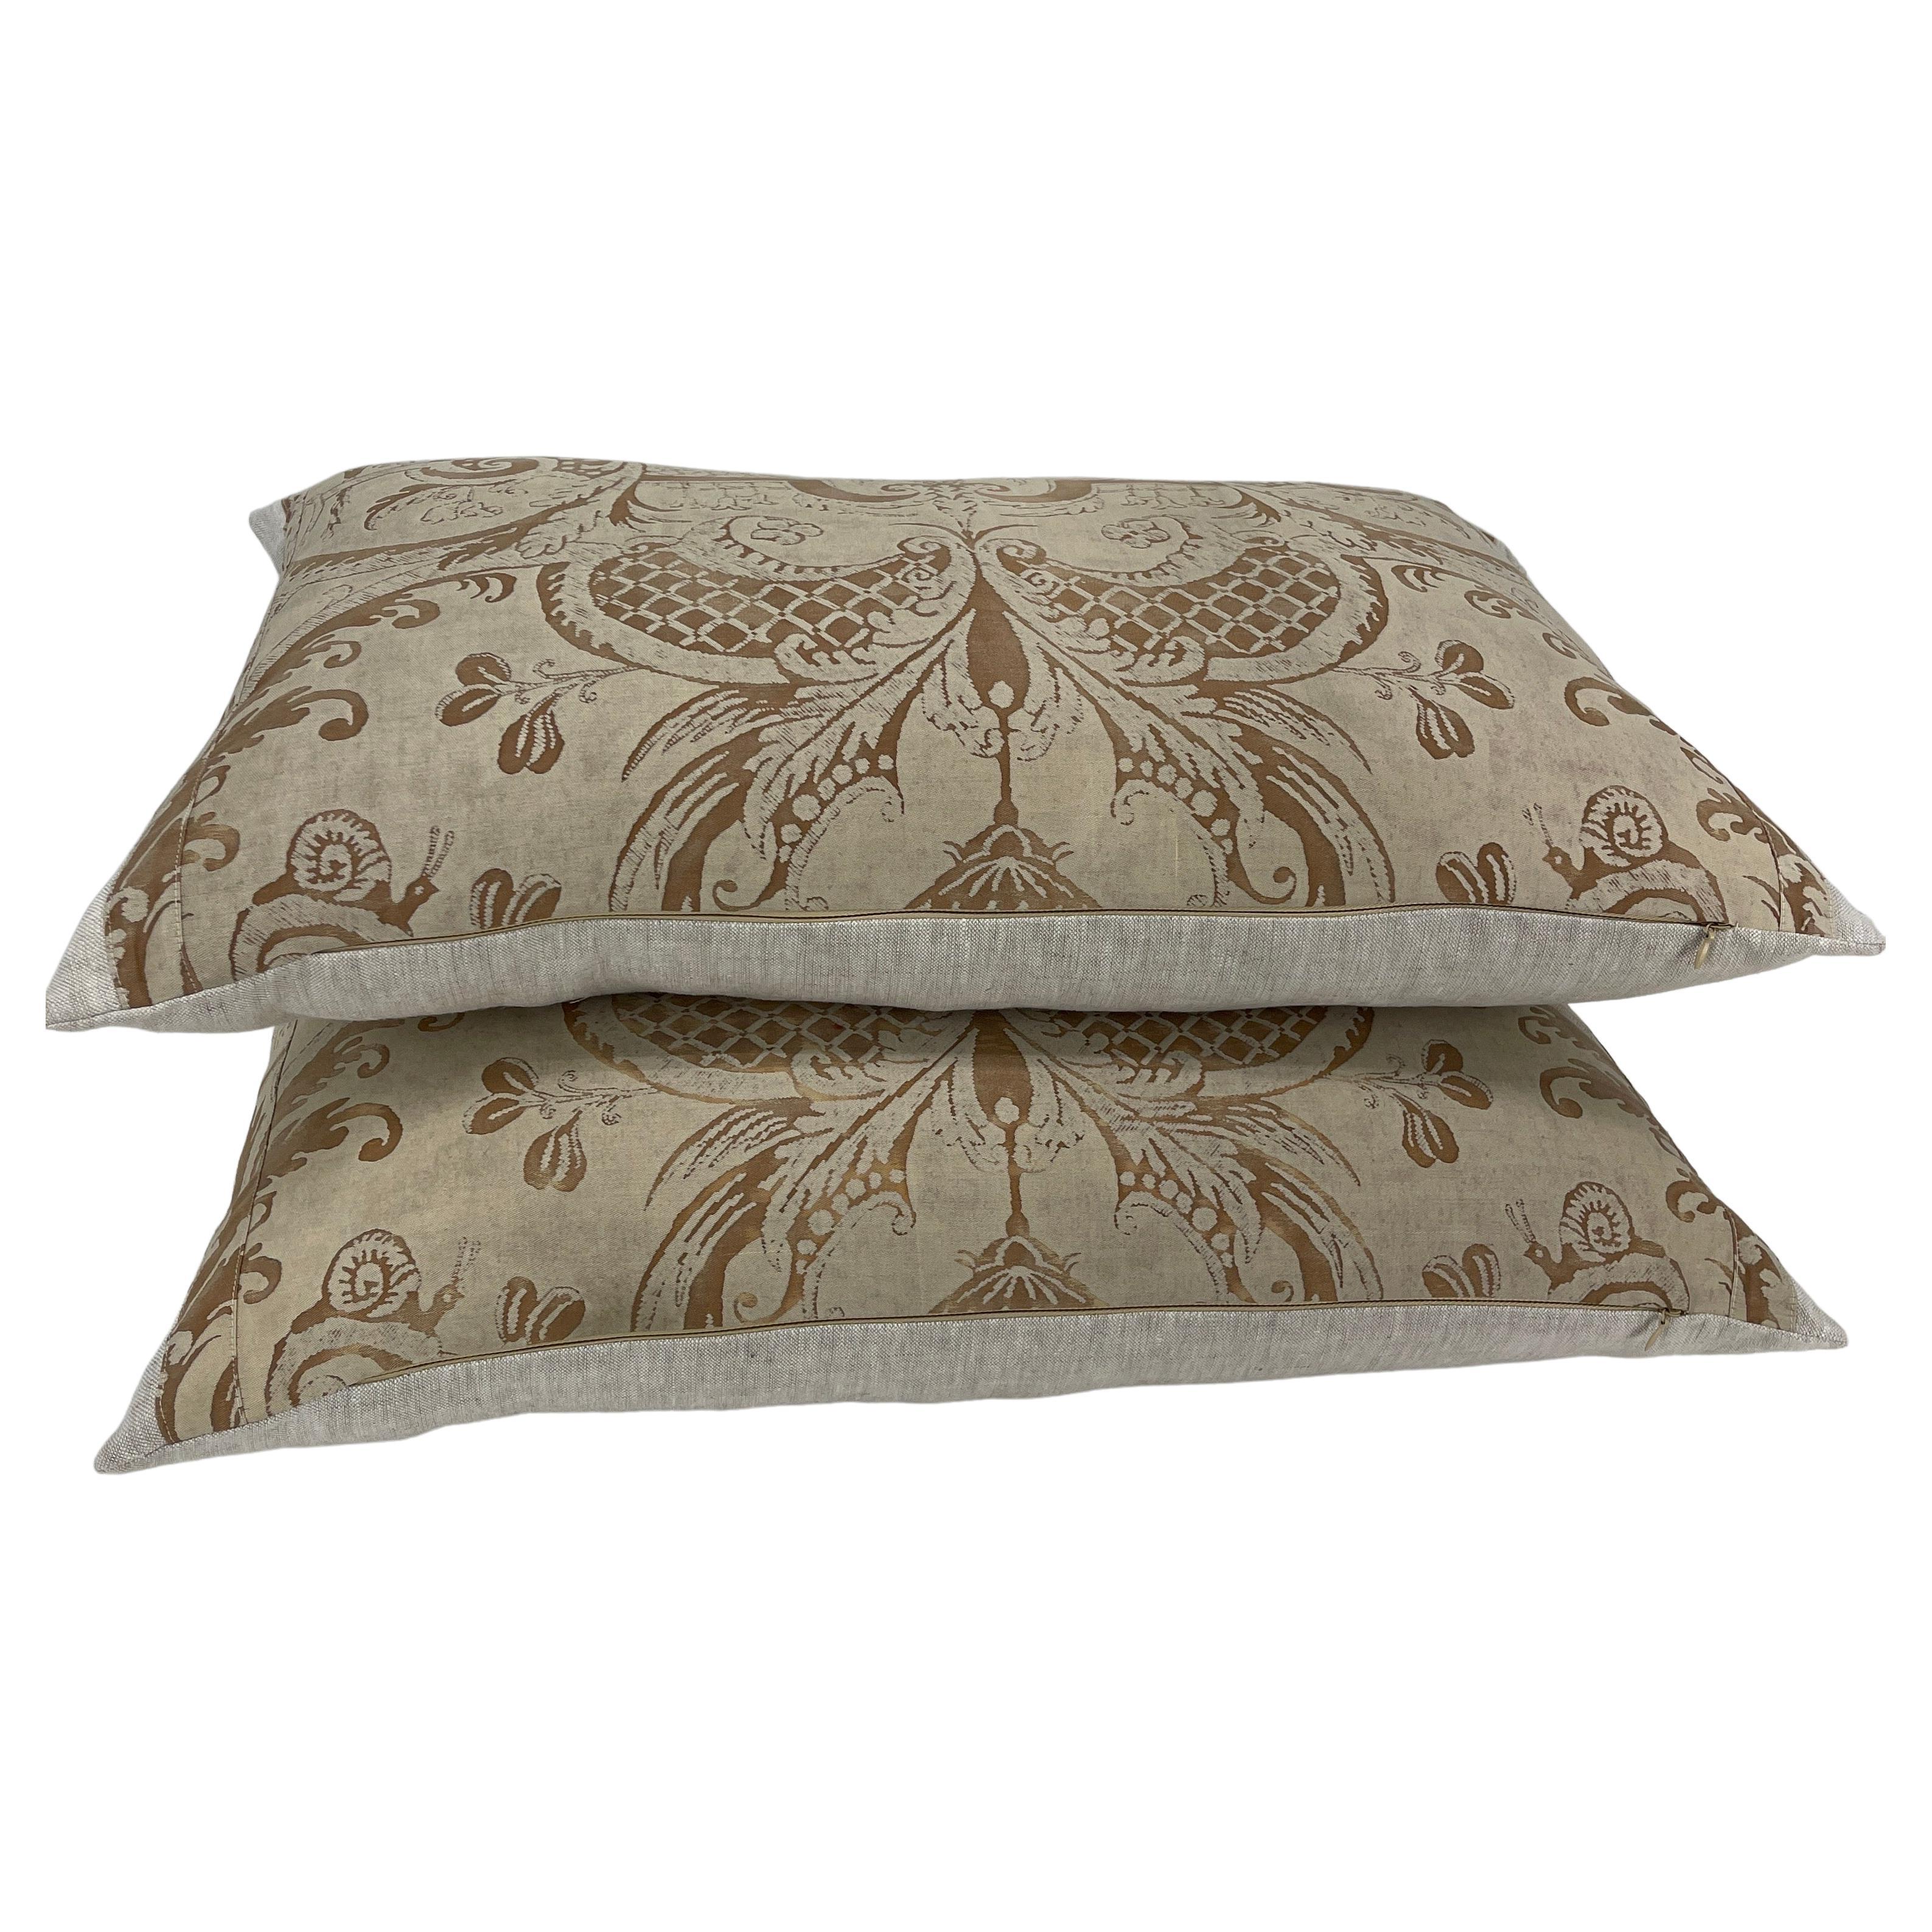 Rococo Pair of Vintage Italian Fortuny Fabric Textile Pillows in Royal Gold Pattern For Sale